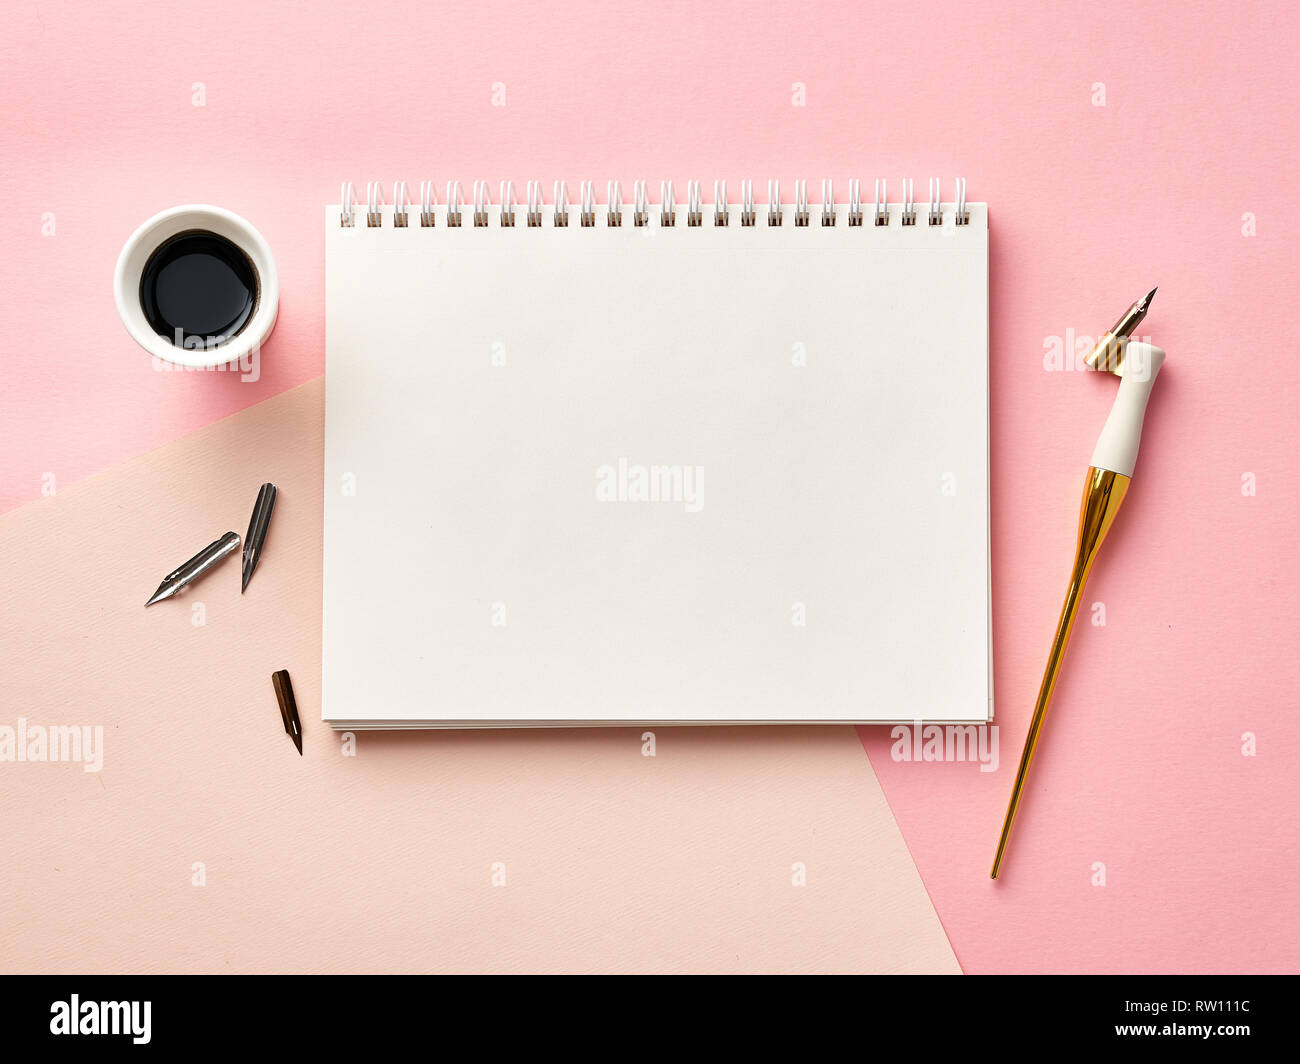 Download Mock Up Of Blank Artist Sketchbook On Pink Background With Calligraphy Pen And Ink View From The Top Stock Photo Alamy